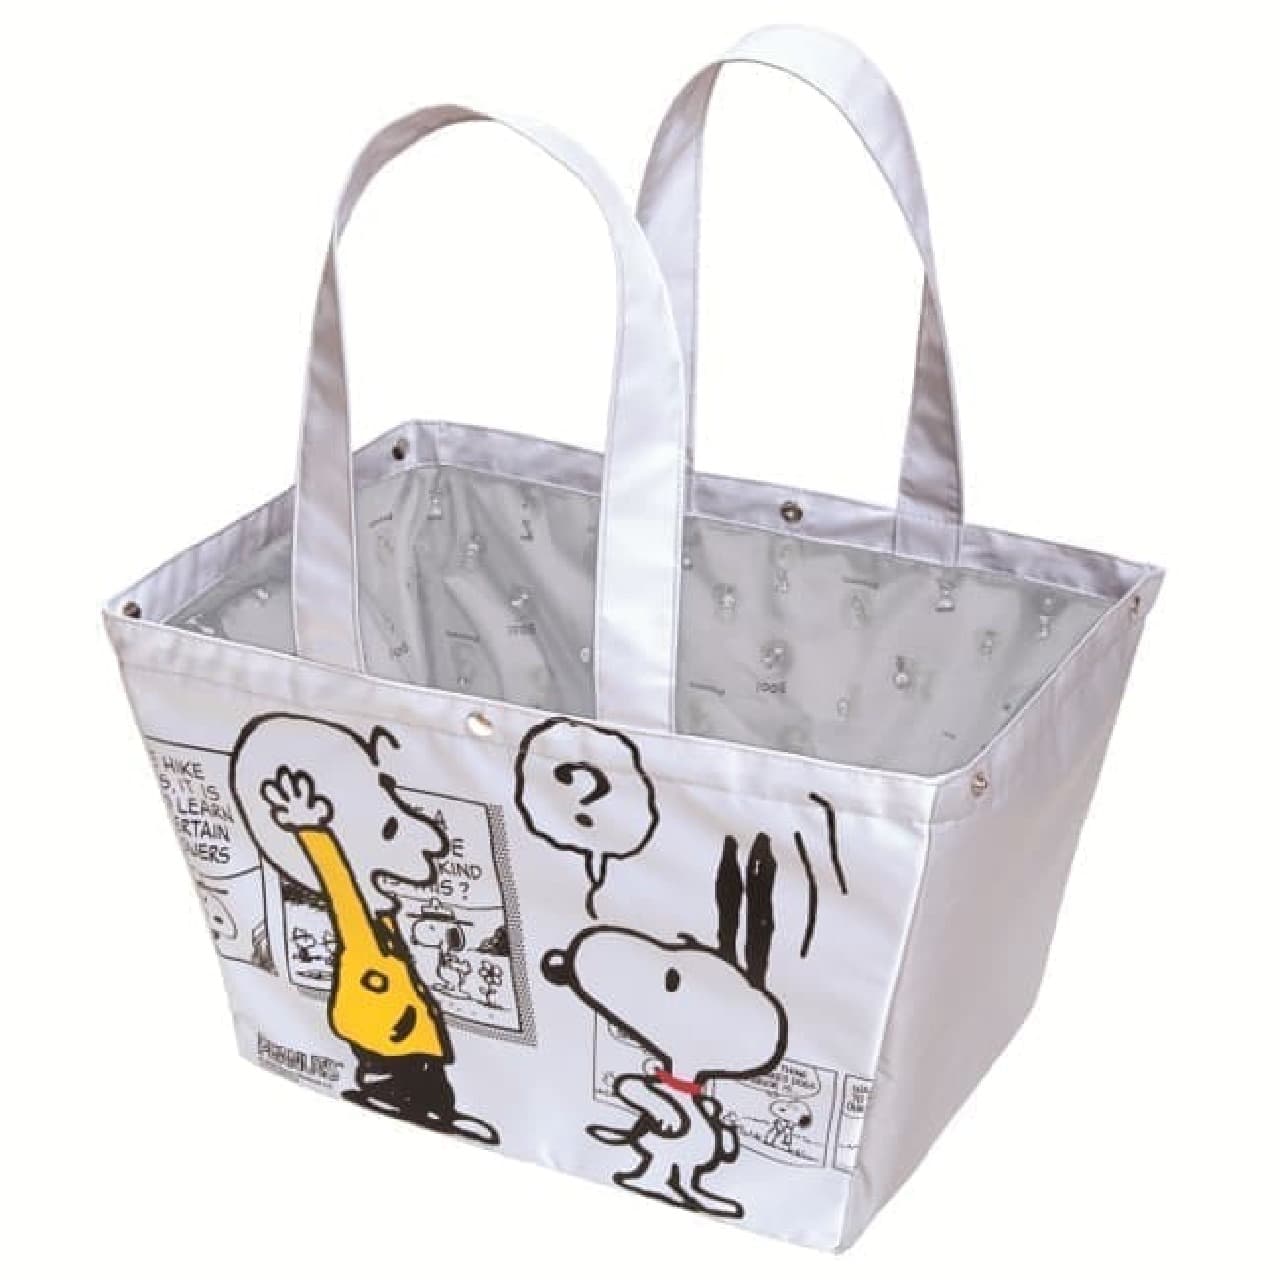 Regicago size that is resistant to SNOOPY rain! Big bag BOOK